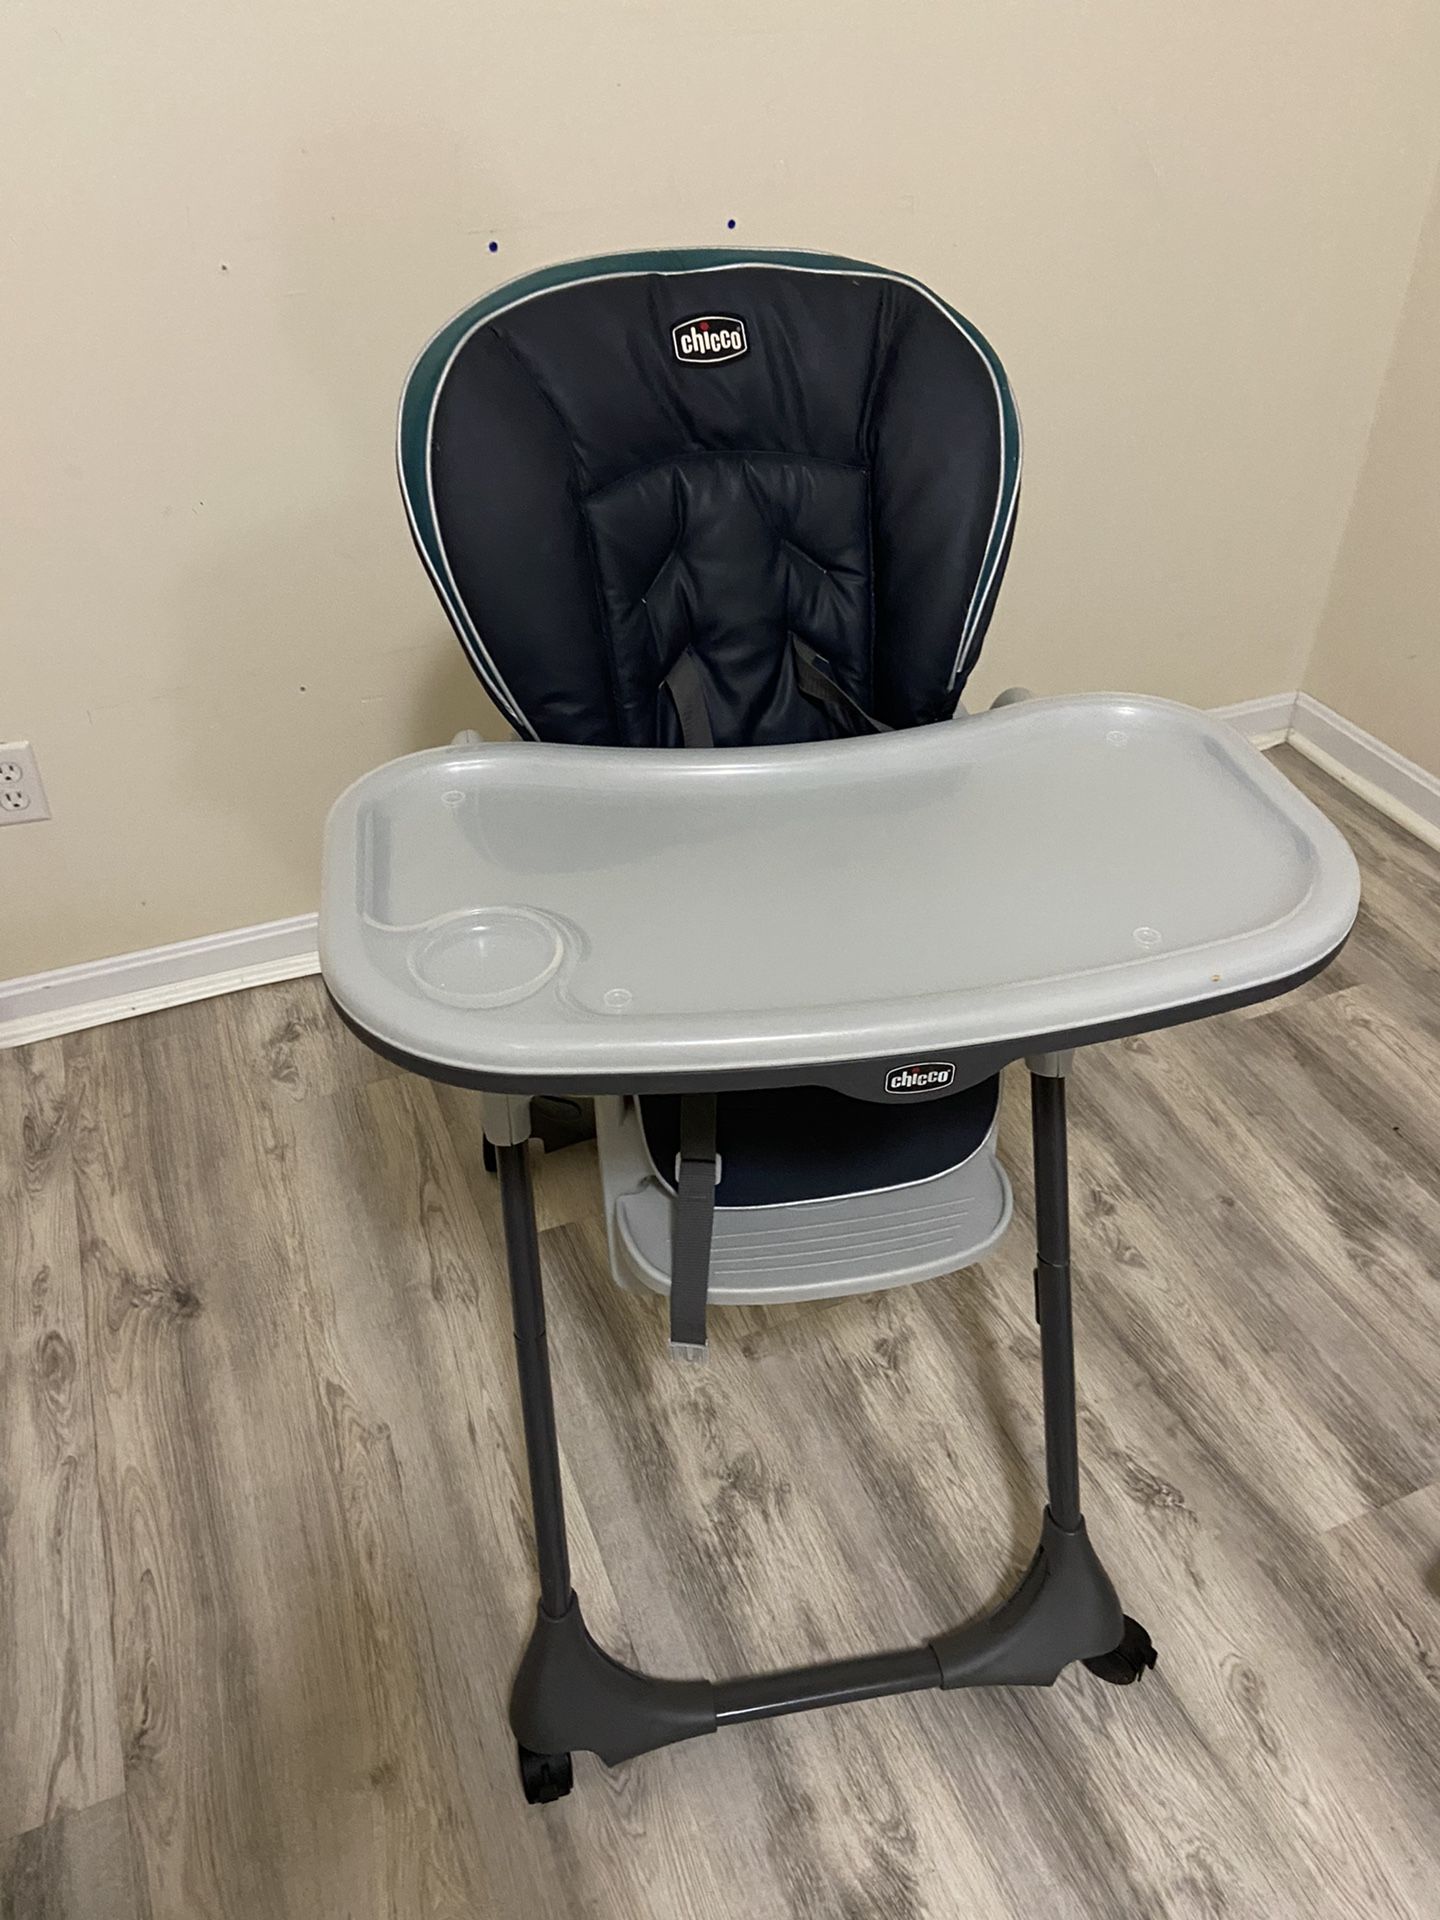 Kids Feeding Chair, Diaper Genie and Other Items